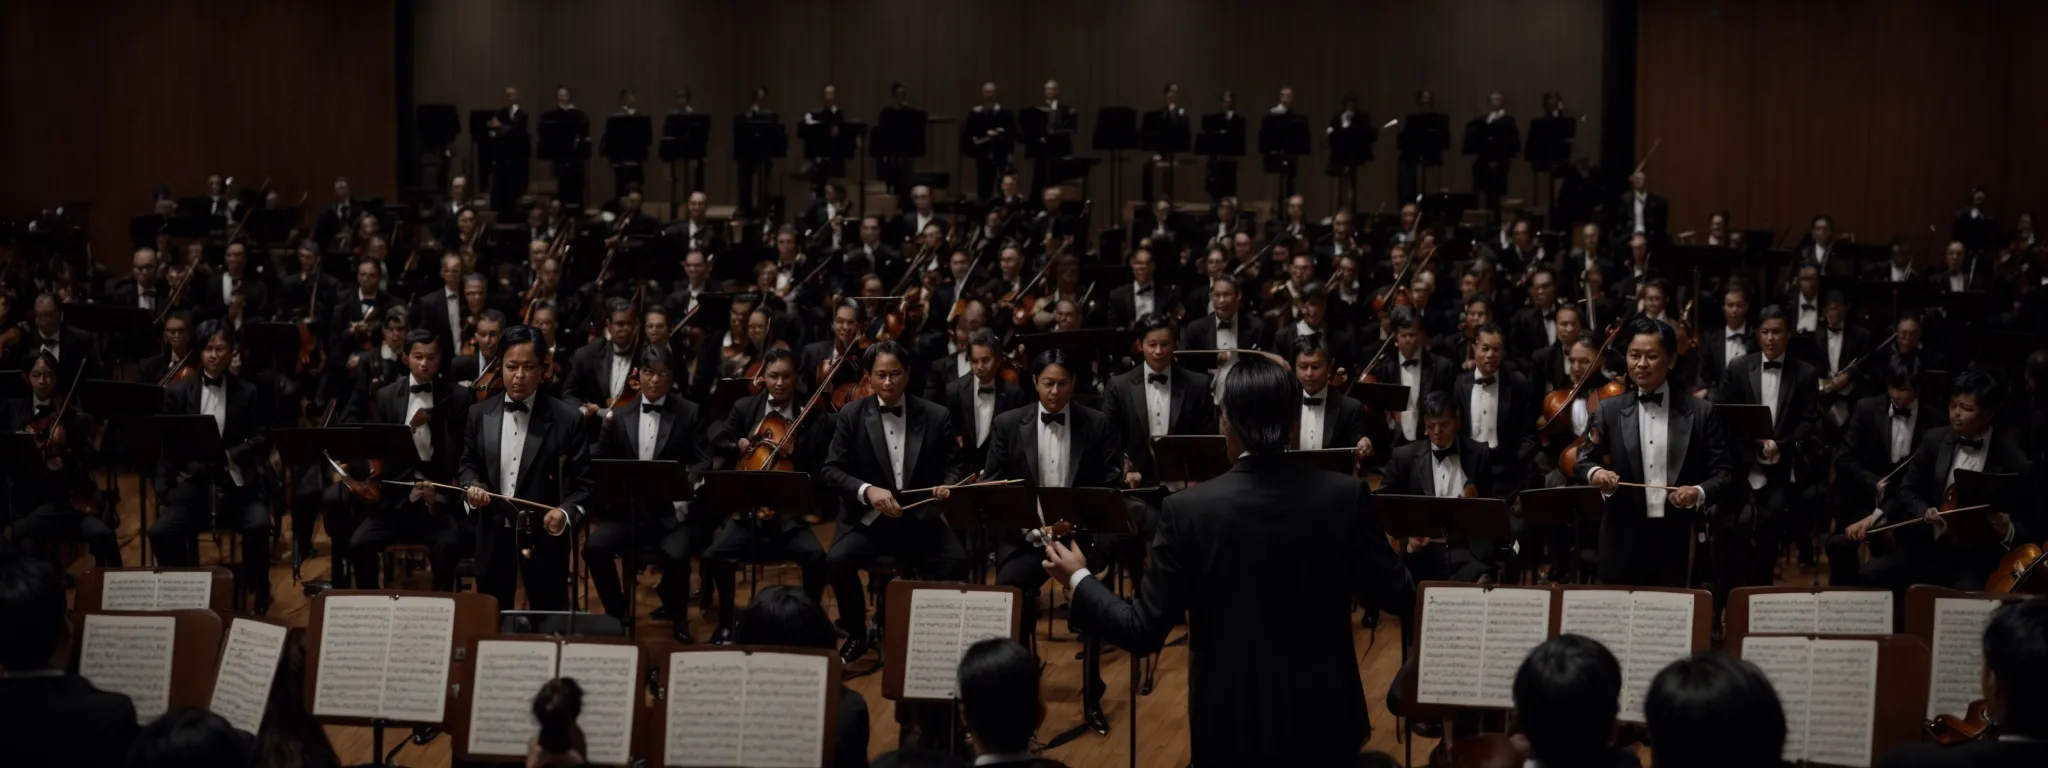 a conductor standing in front of an orchestra, poised to lead them into a harmonious performance.